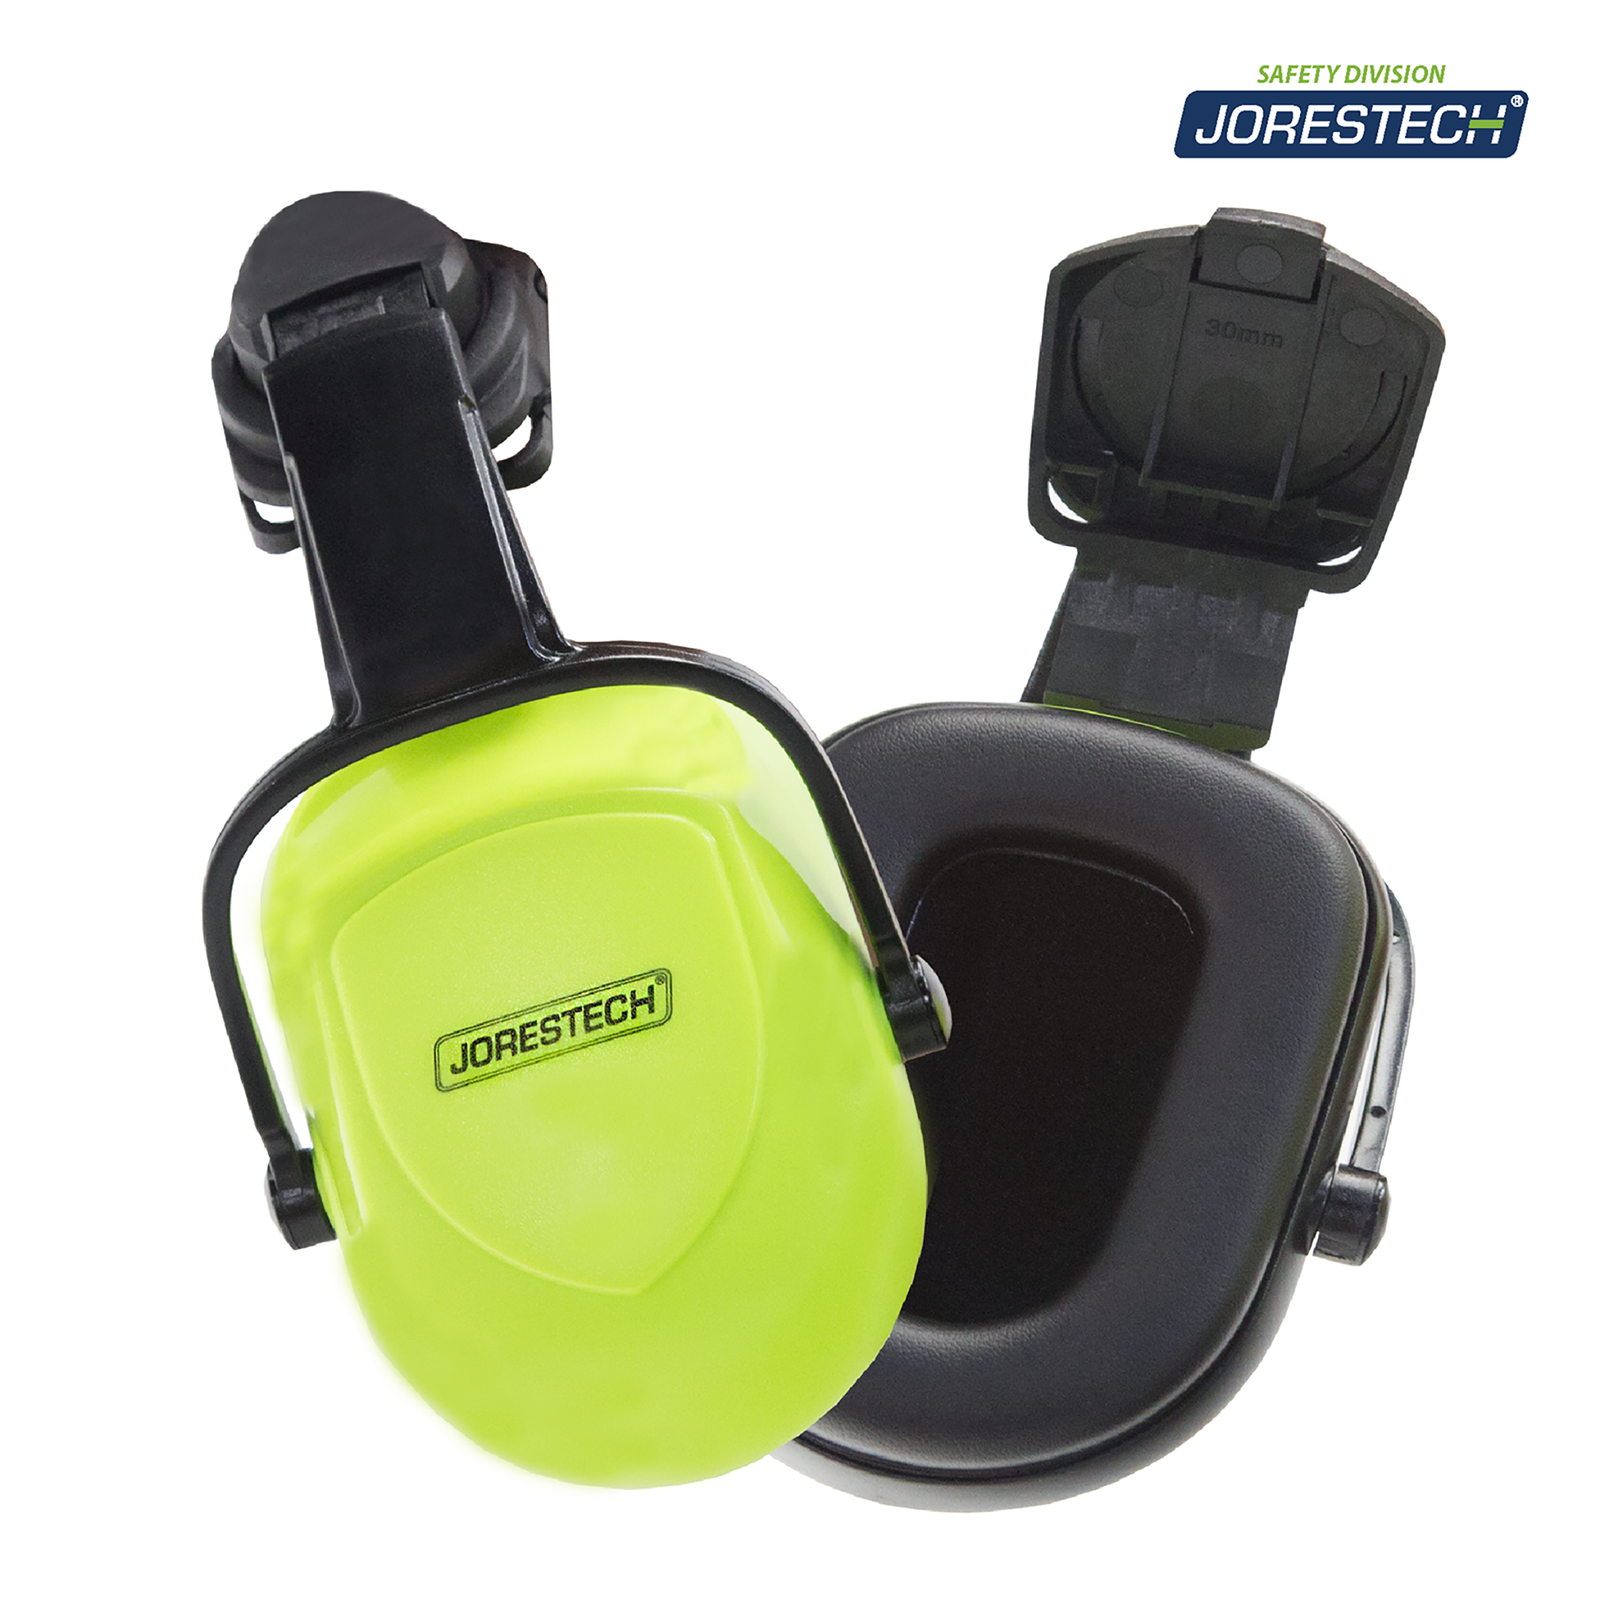 Features the lime and black removable JORESTECH® earmuffs that are part of this combo